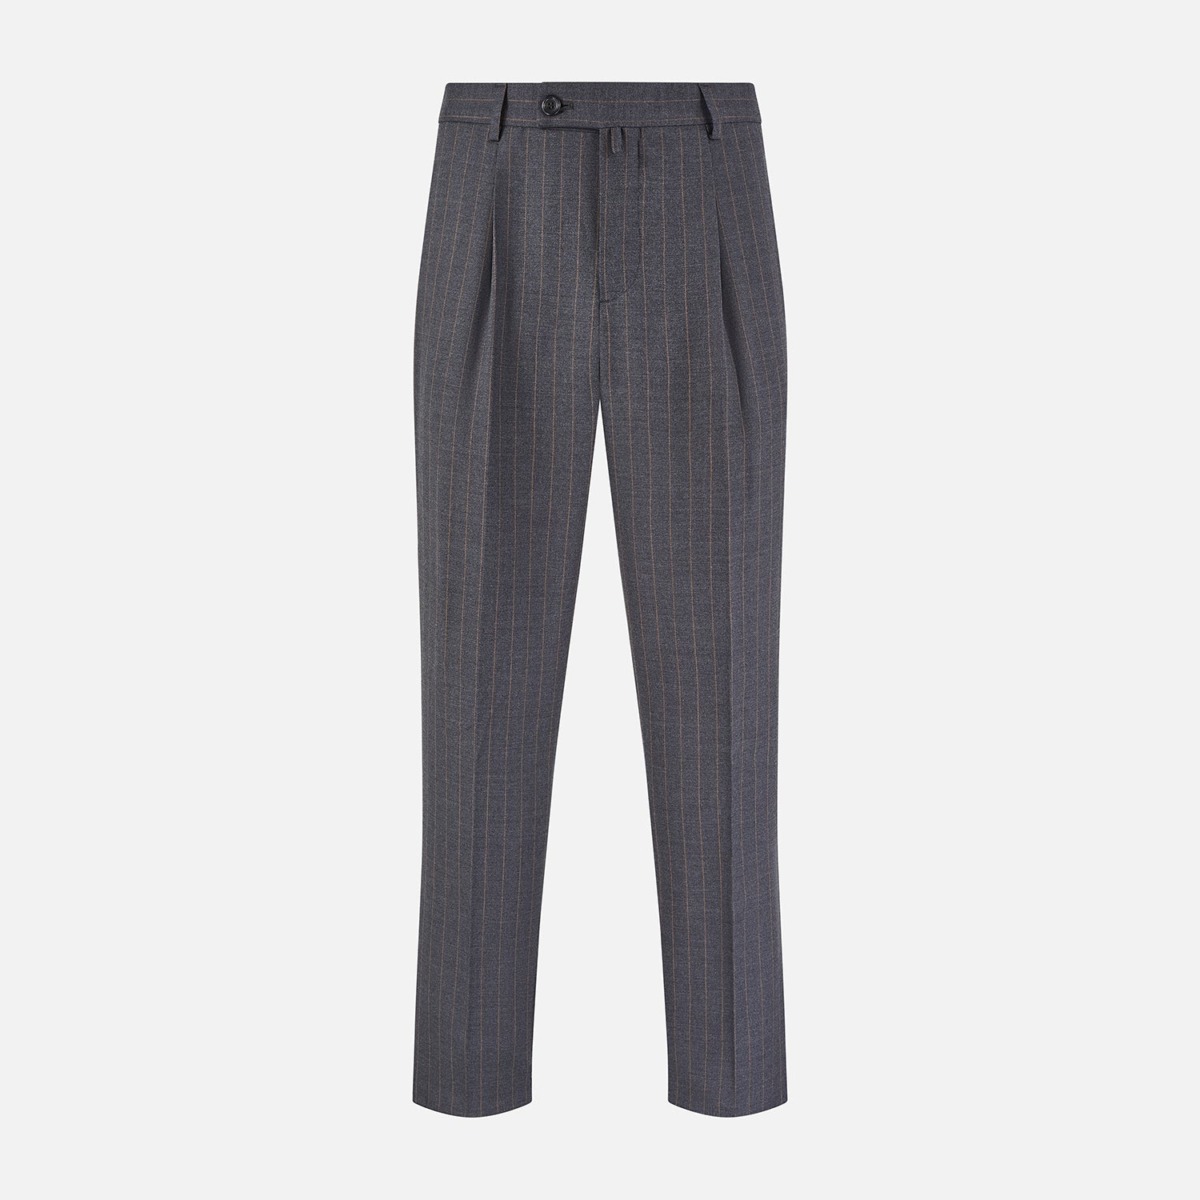 Gents Trousers Grey - Turnbull & Asser - Turnbull And Asser GOOFASH